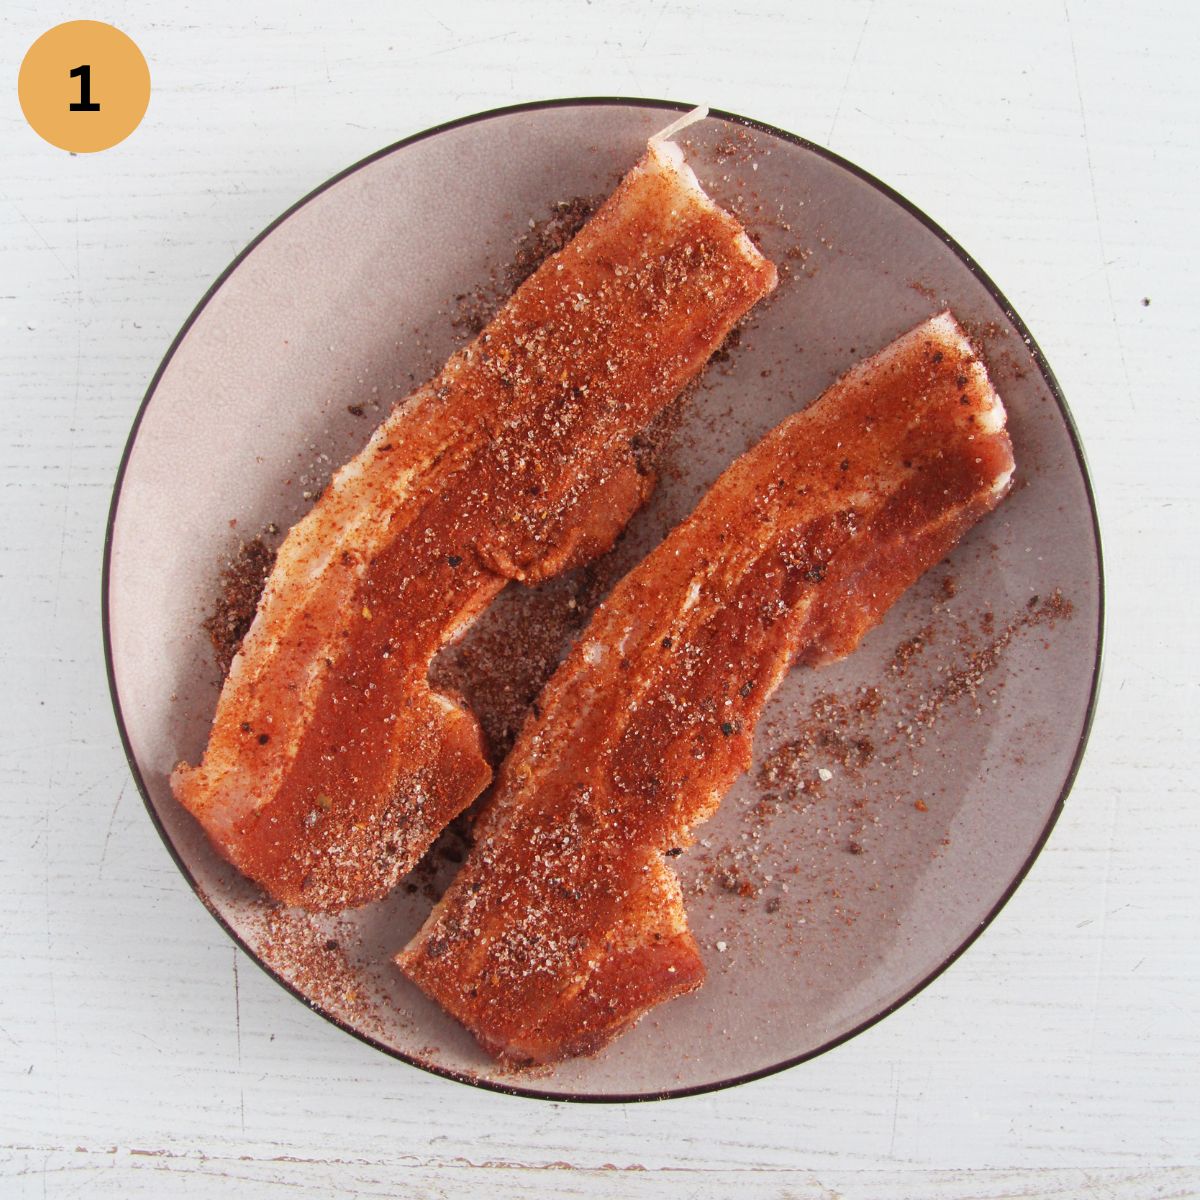 two slices of seasoned pork belly on a small plate.